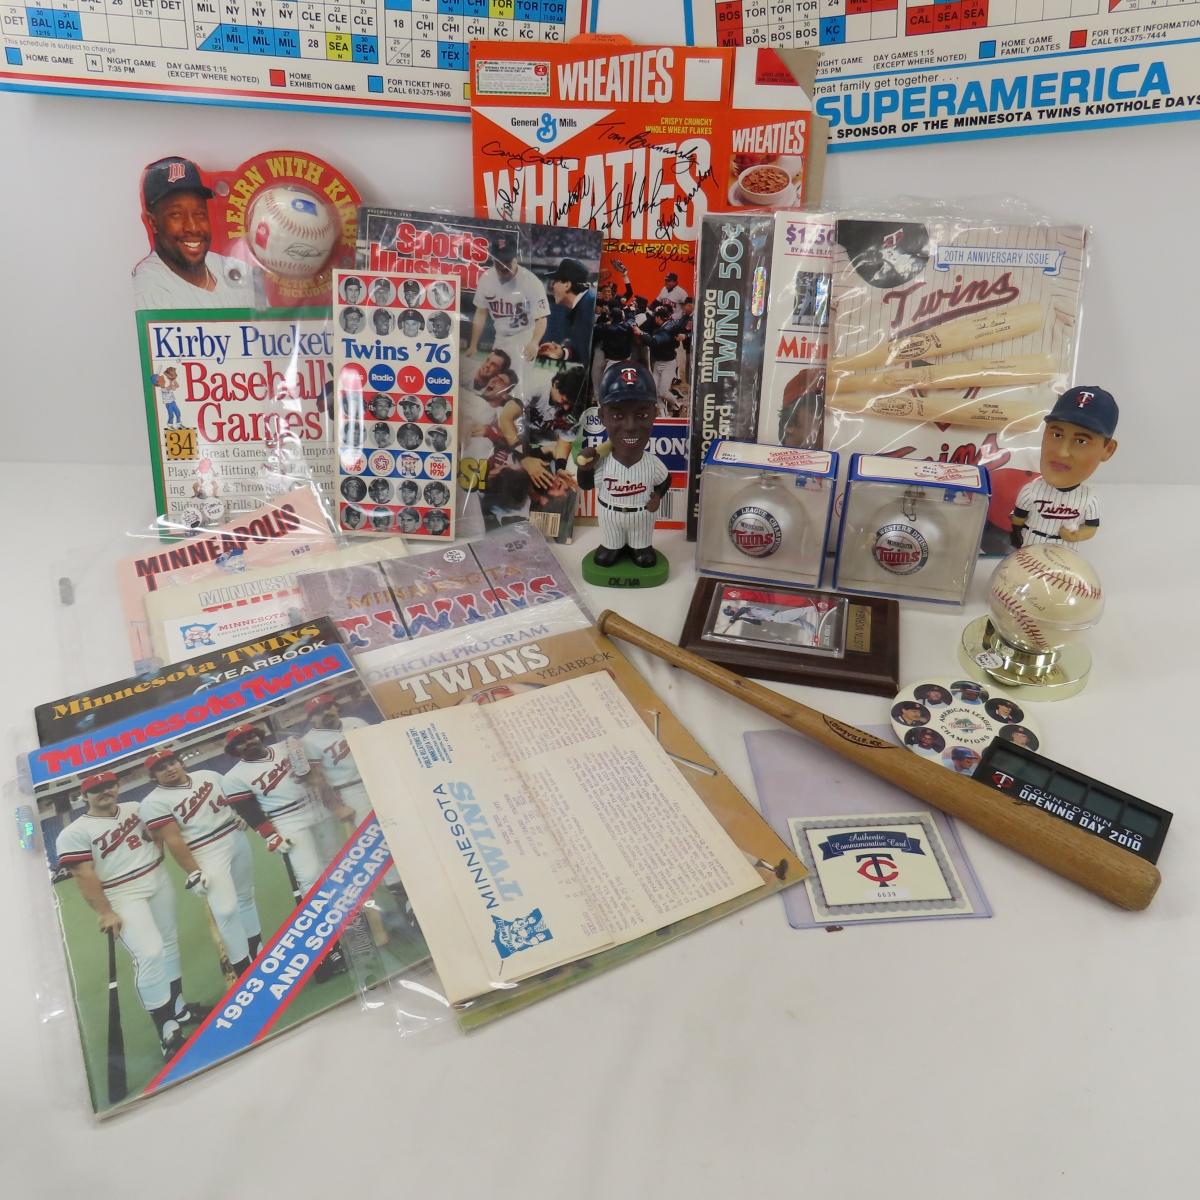 MN Twins Collectibles- Bobblehead, Programs